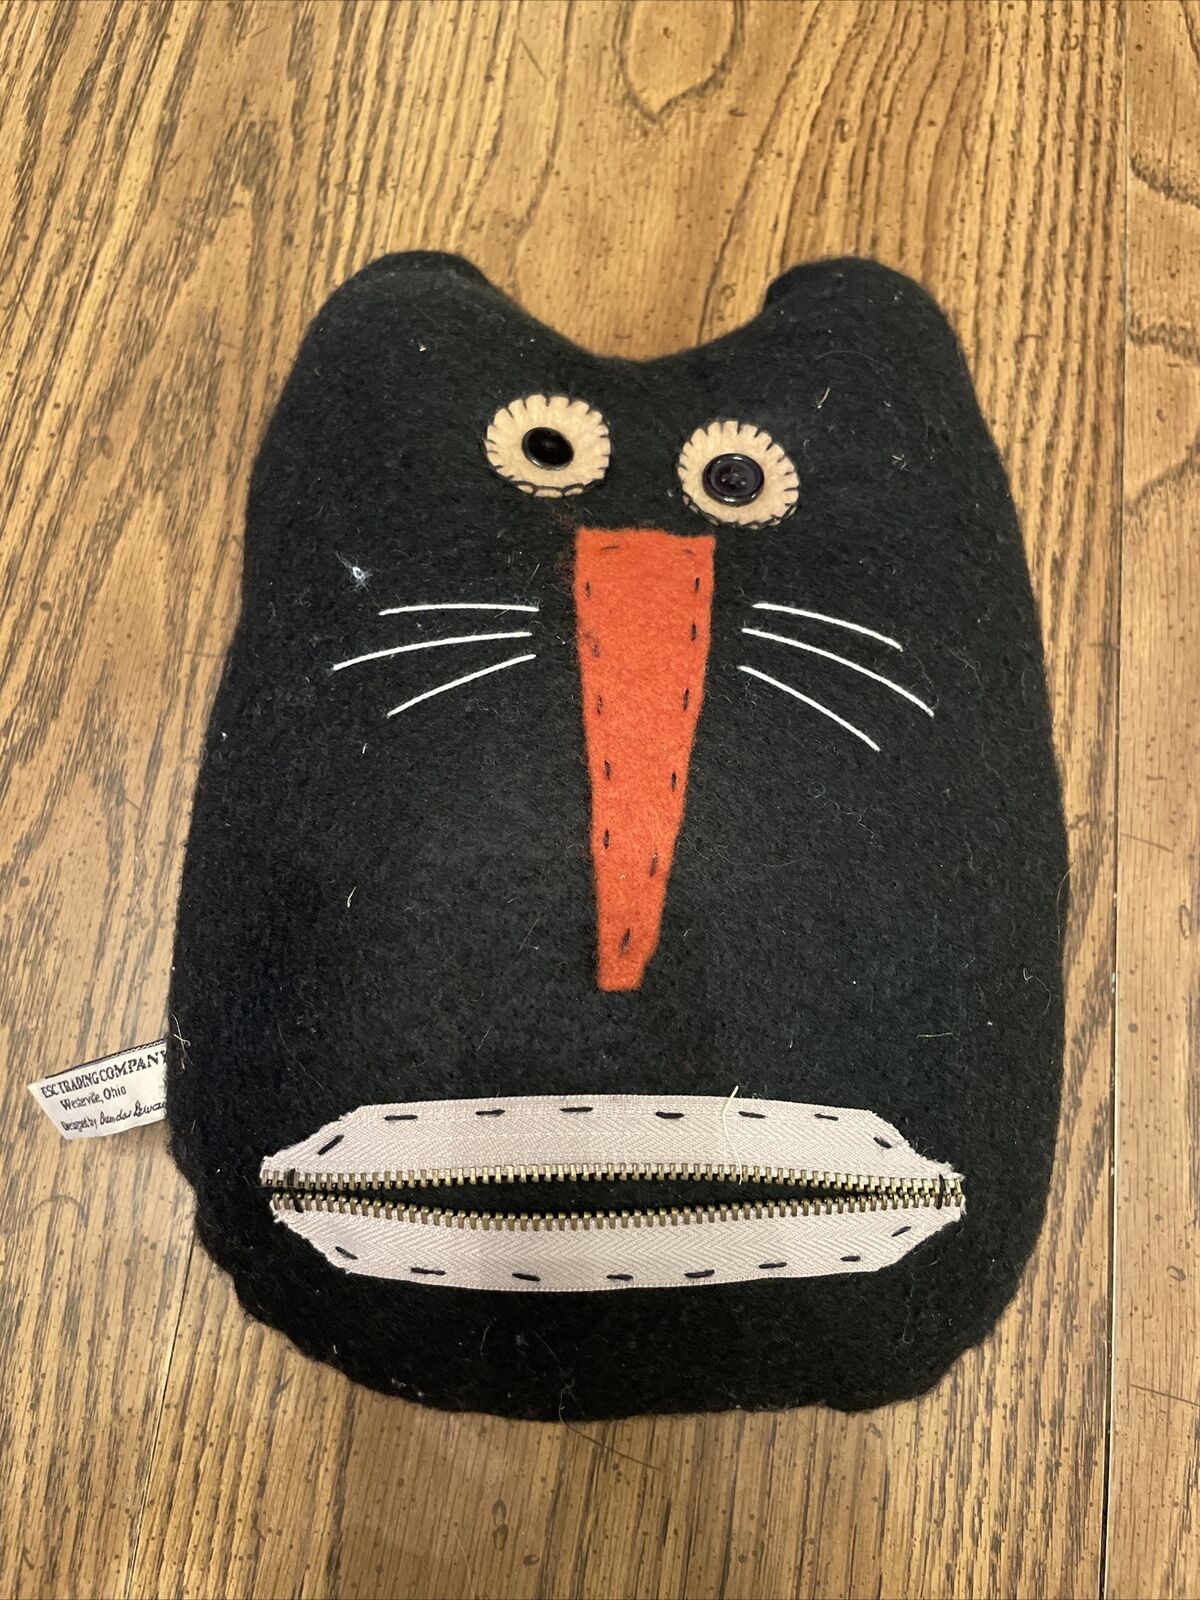 Vintage Black Cat with Zipper Mouth.  ESC Trading Company 2002